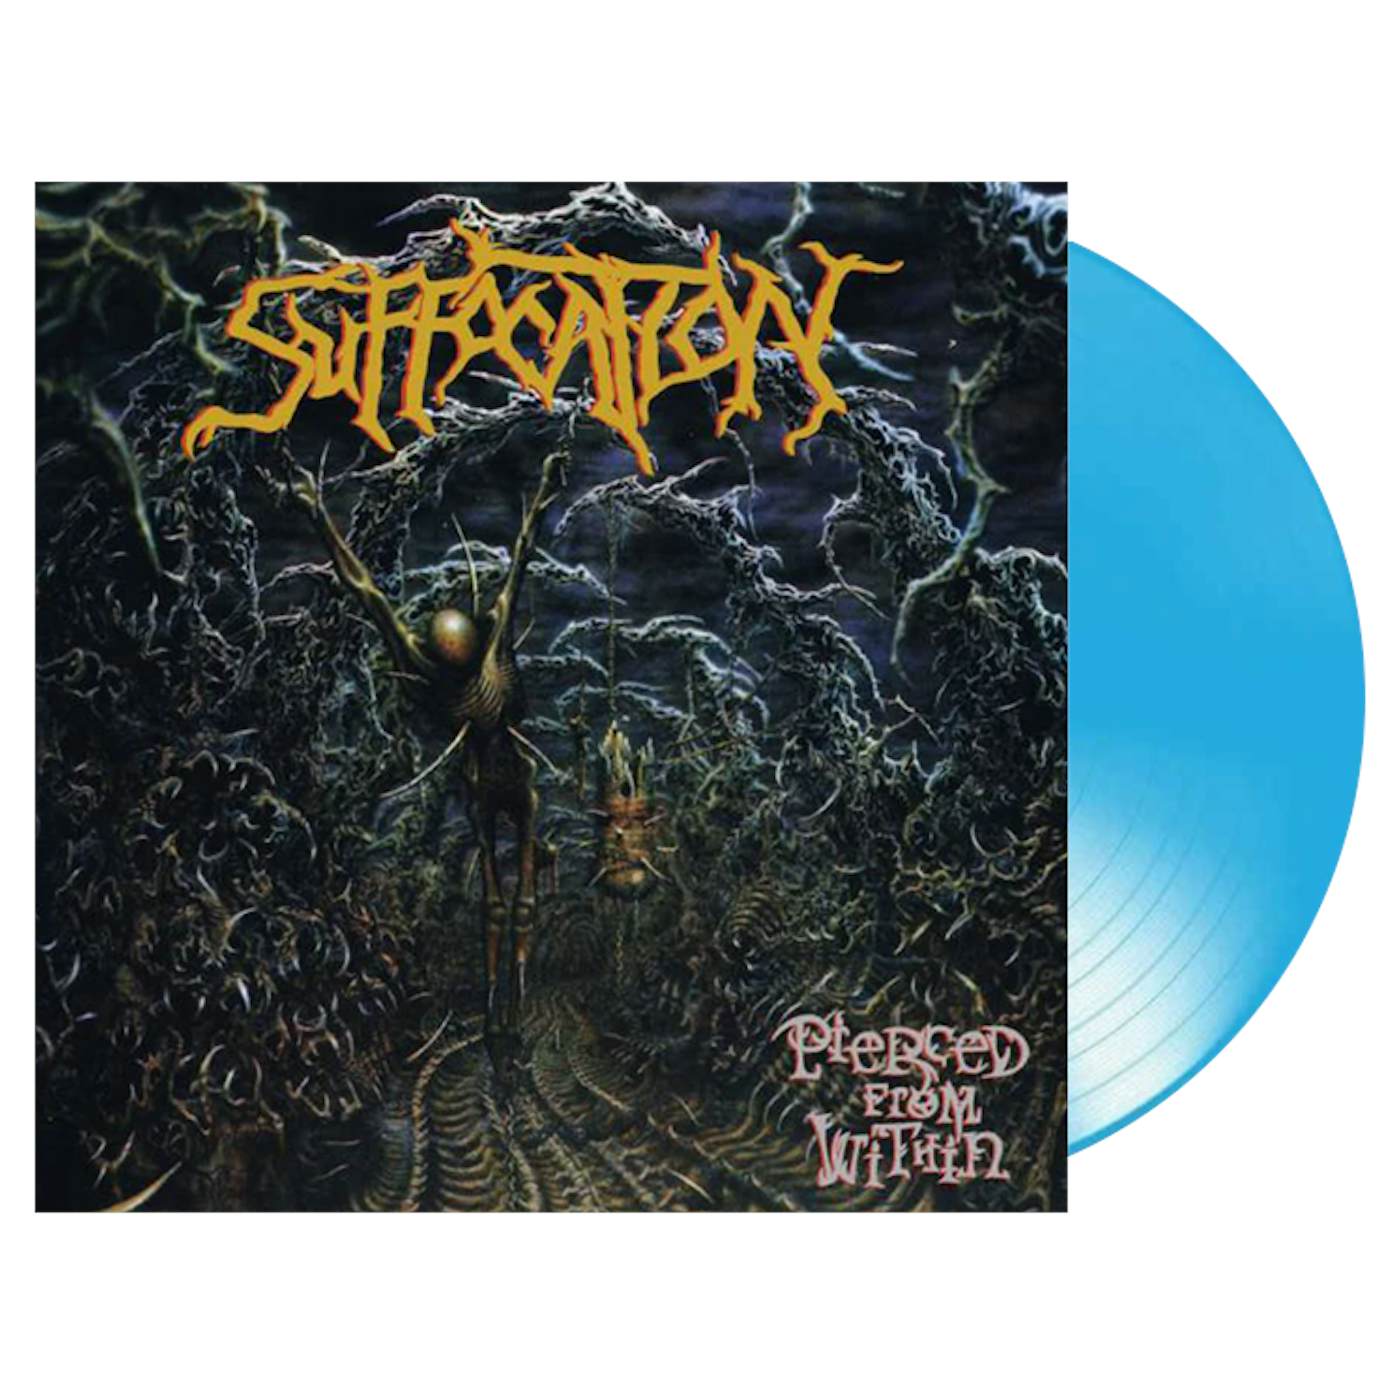  SUFFOCATION - 'Pierced From Within' LP (Blue) (Vinyl)